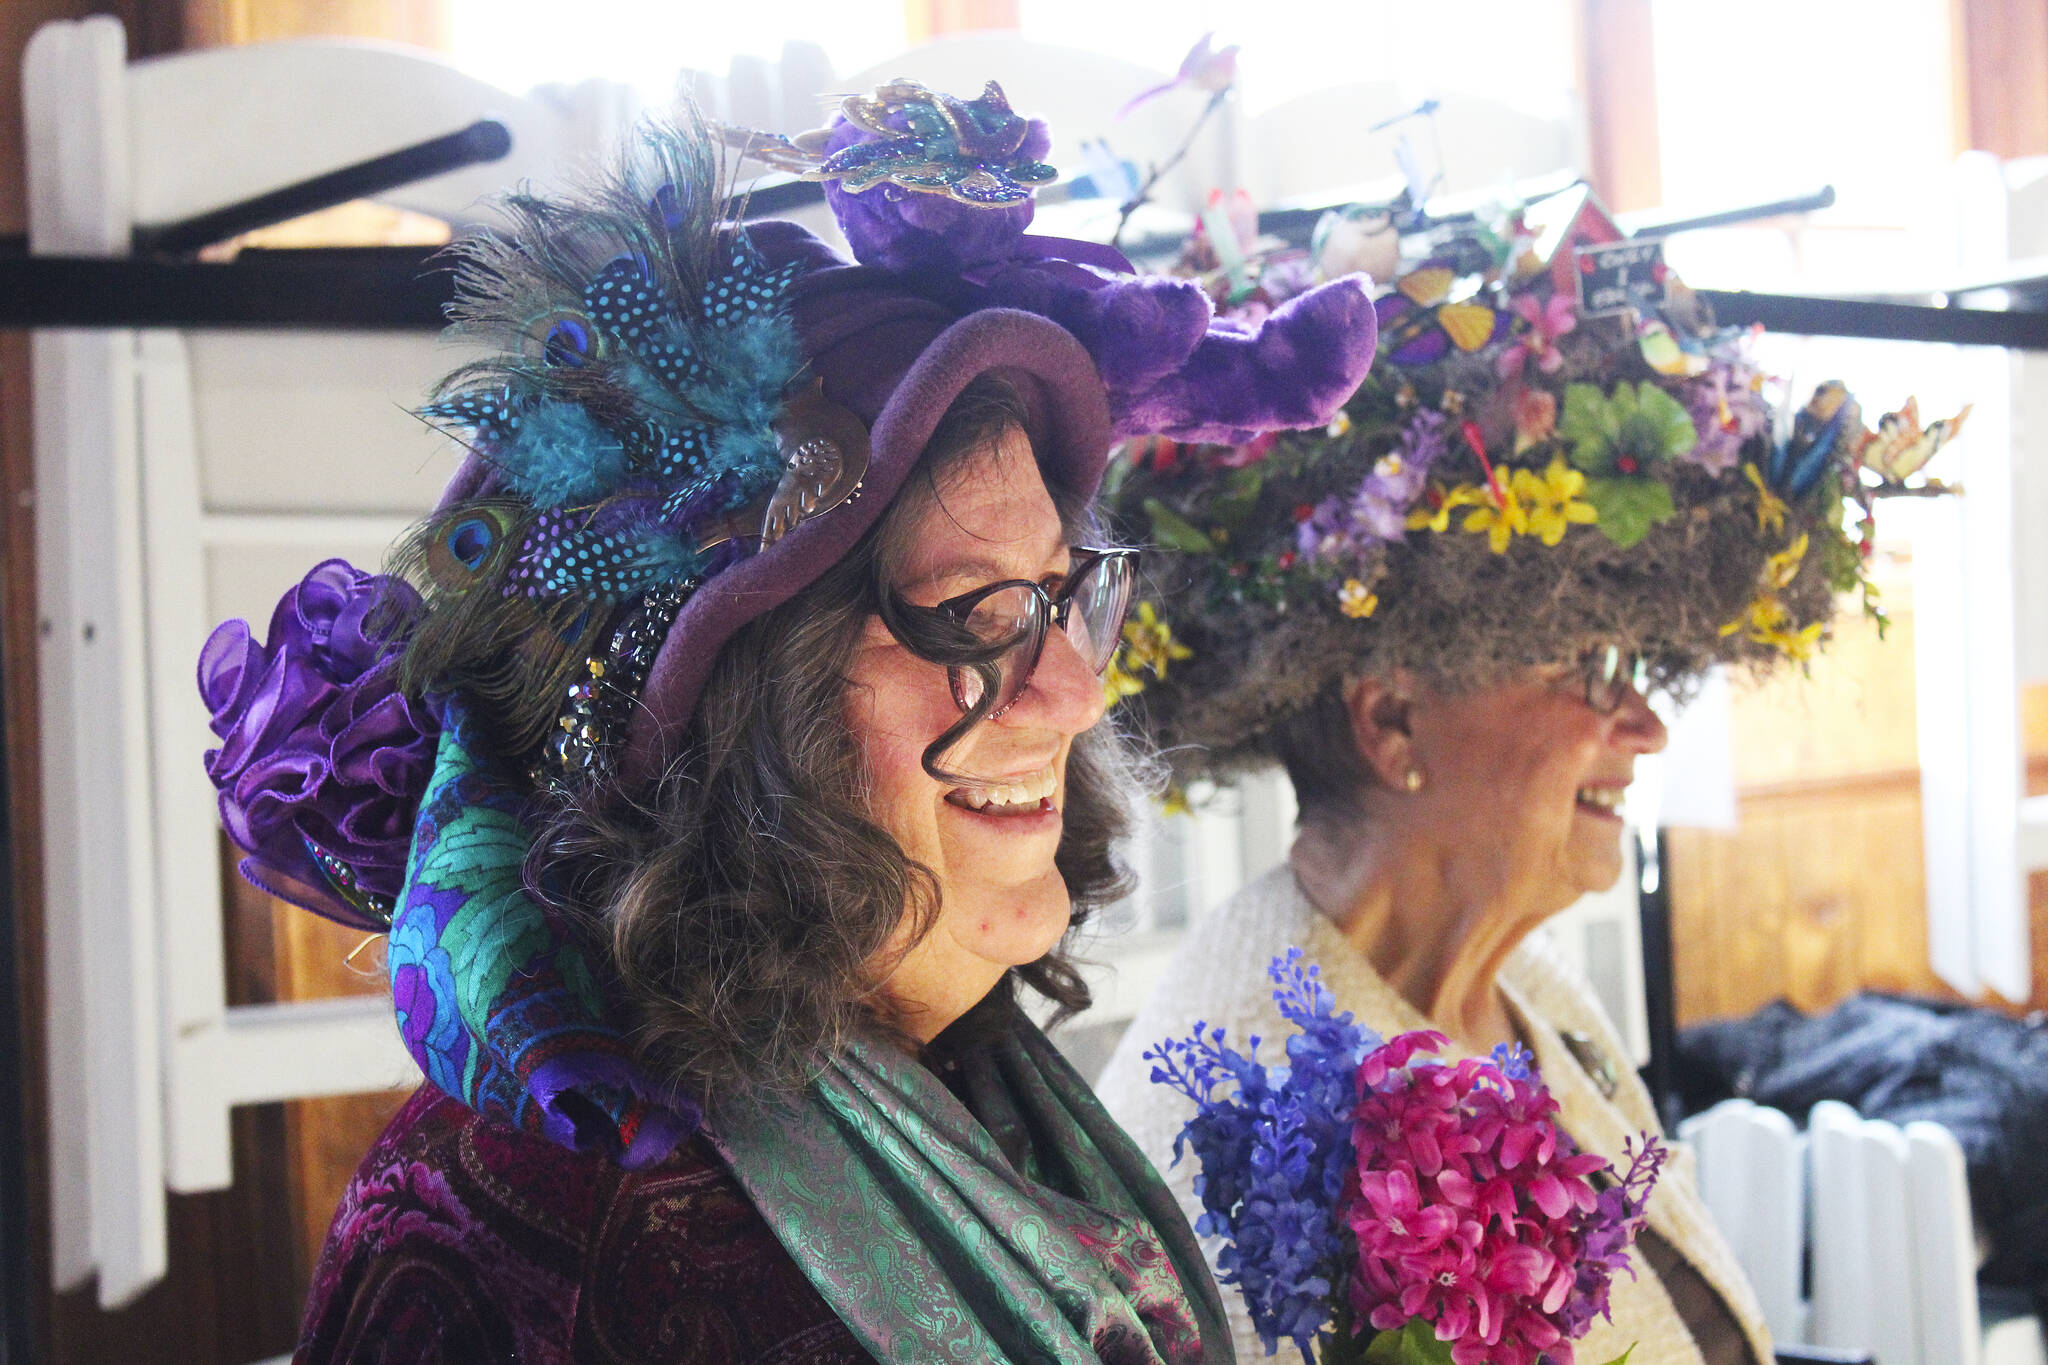 The Enumclaw Garden Club’s annual Breakfast for the Birds event features breakfast, a silent auction, a speaker, and a themed hat parade. Pictured are some hat parade contestants from the 2022 event. Photo by Ray Miller-Still